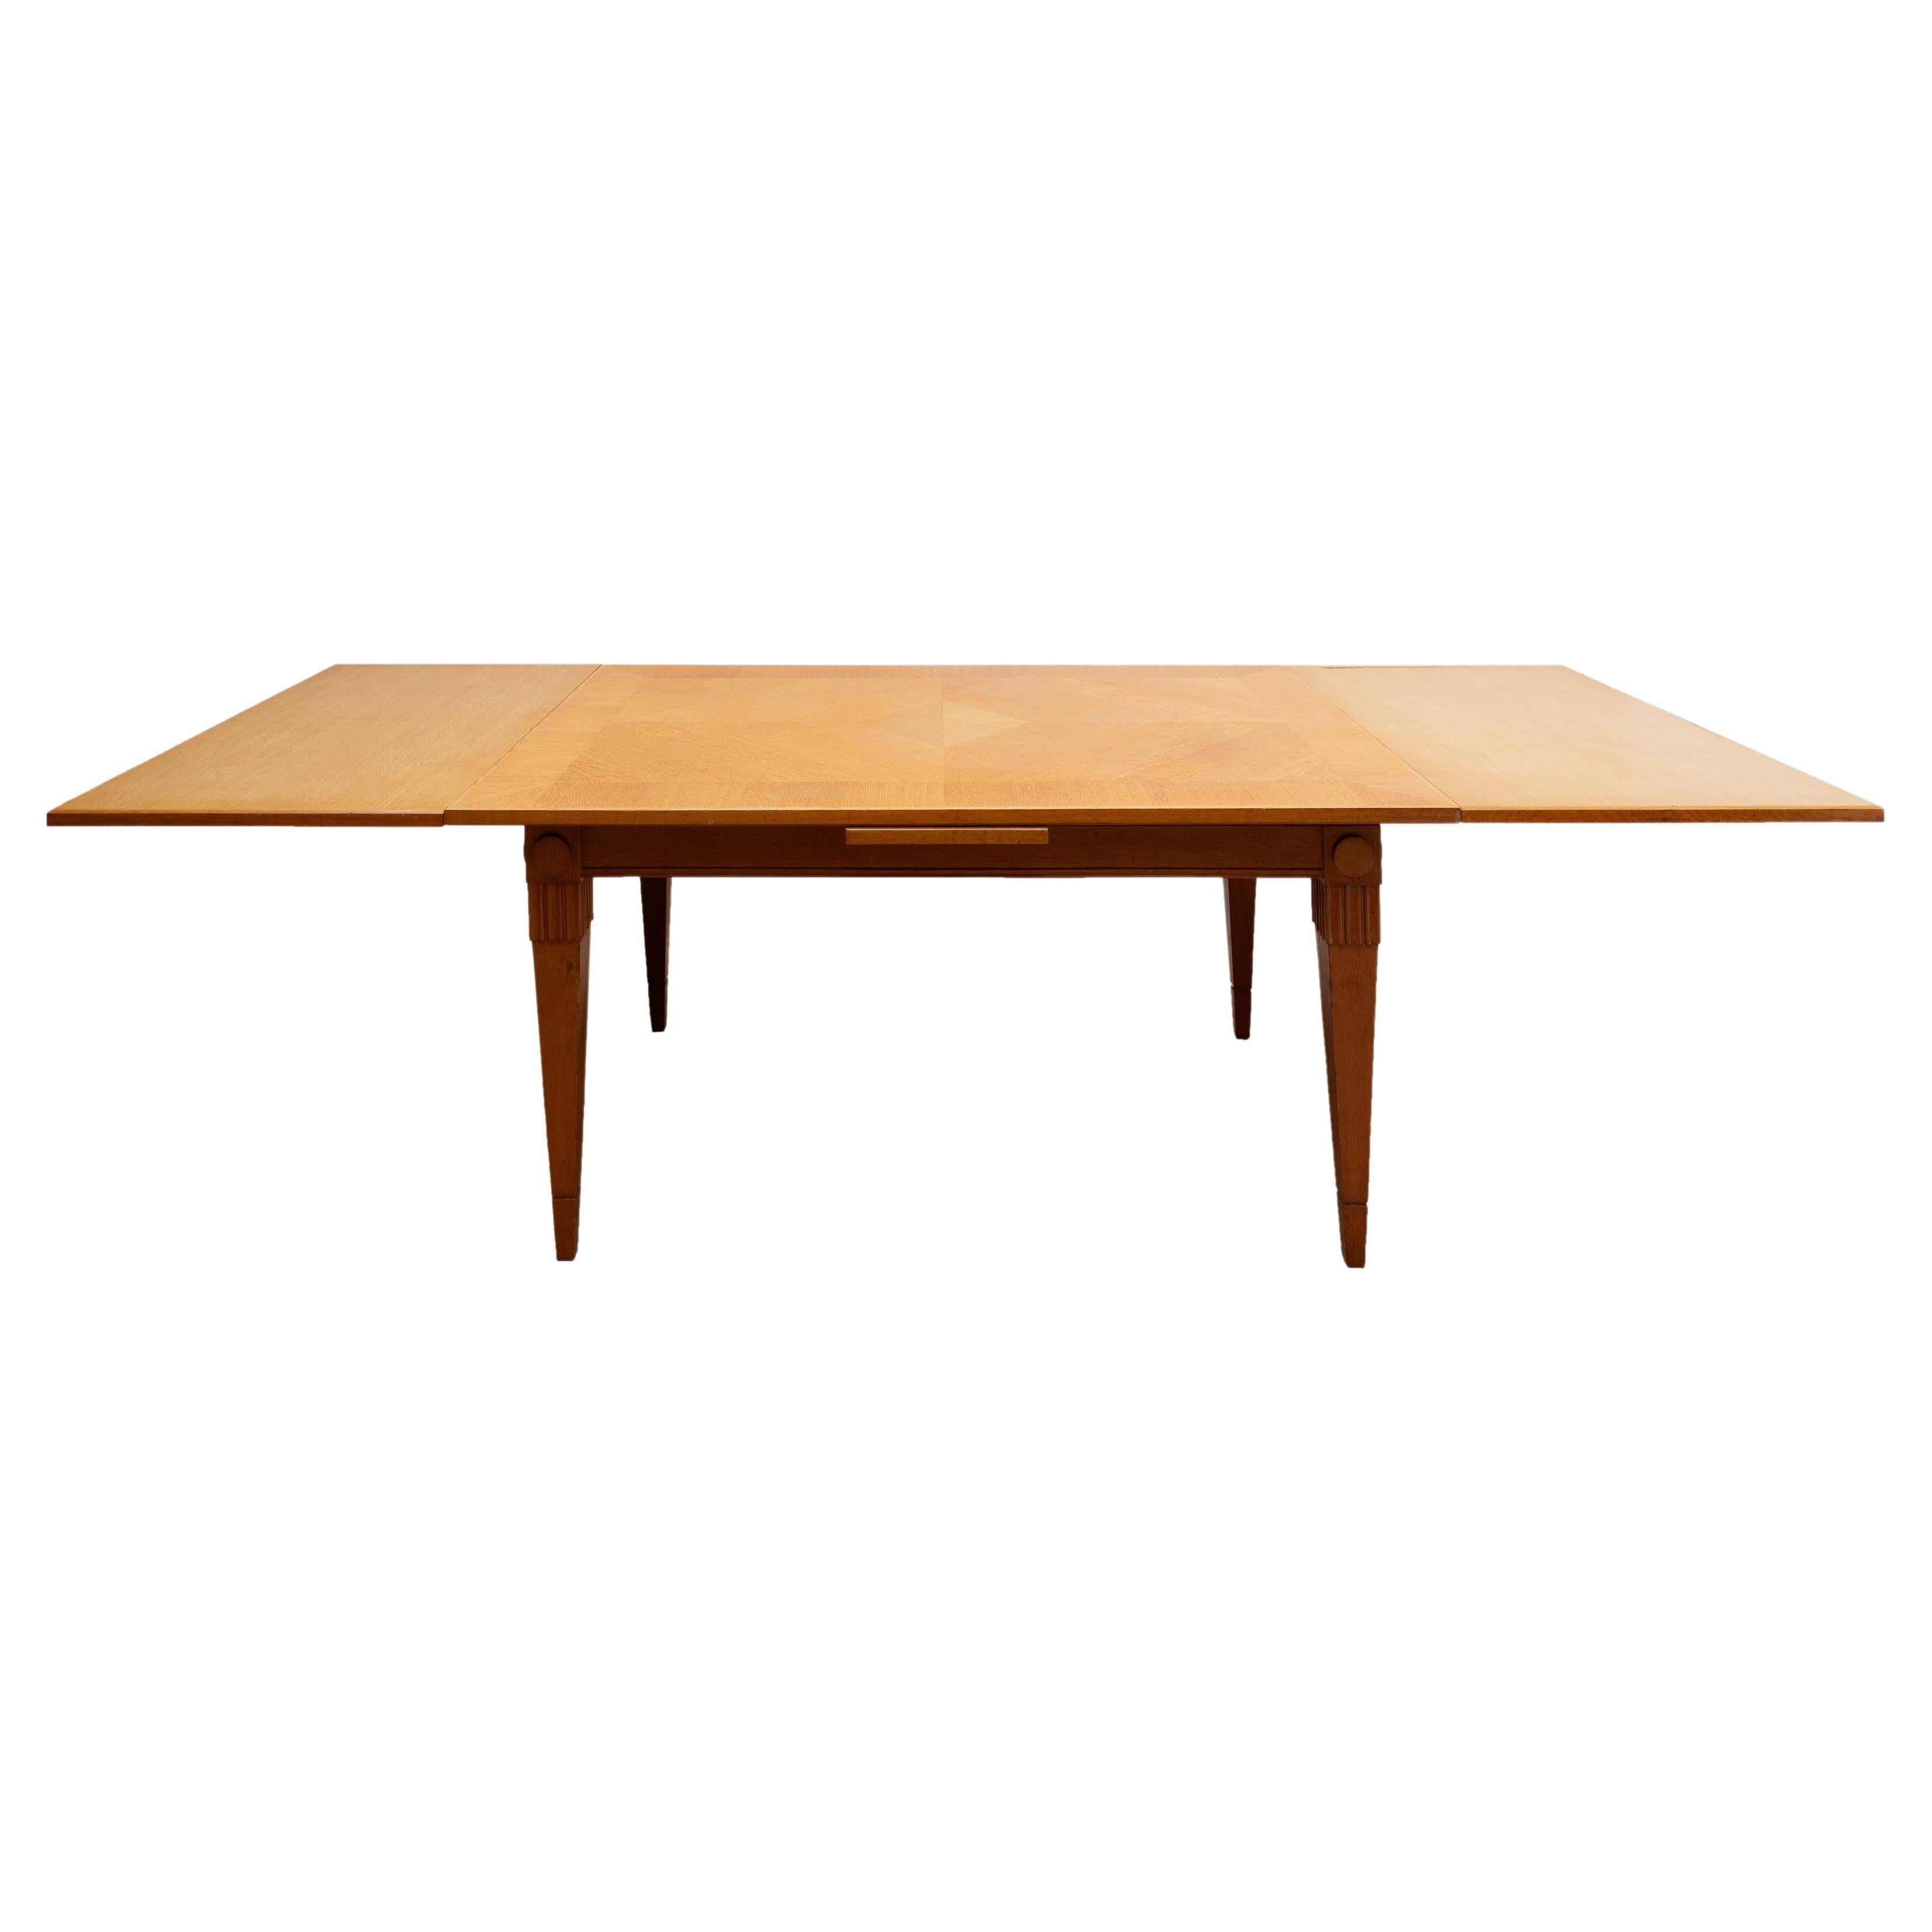 Belgian dining table from De Coene Frères, 1940s in original good condition with extendable trays are located under the table top and are easy to extend and enlarge the table.